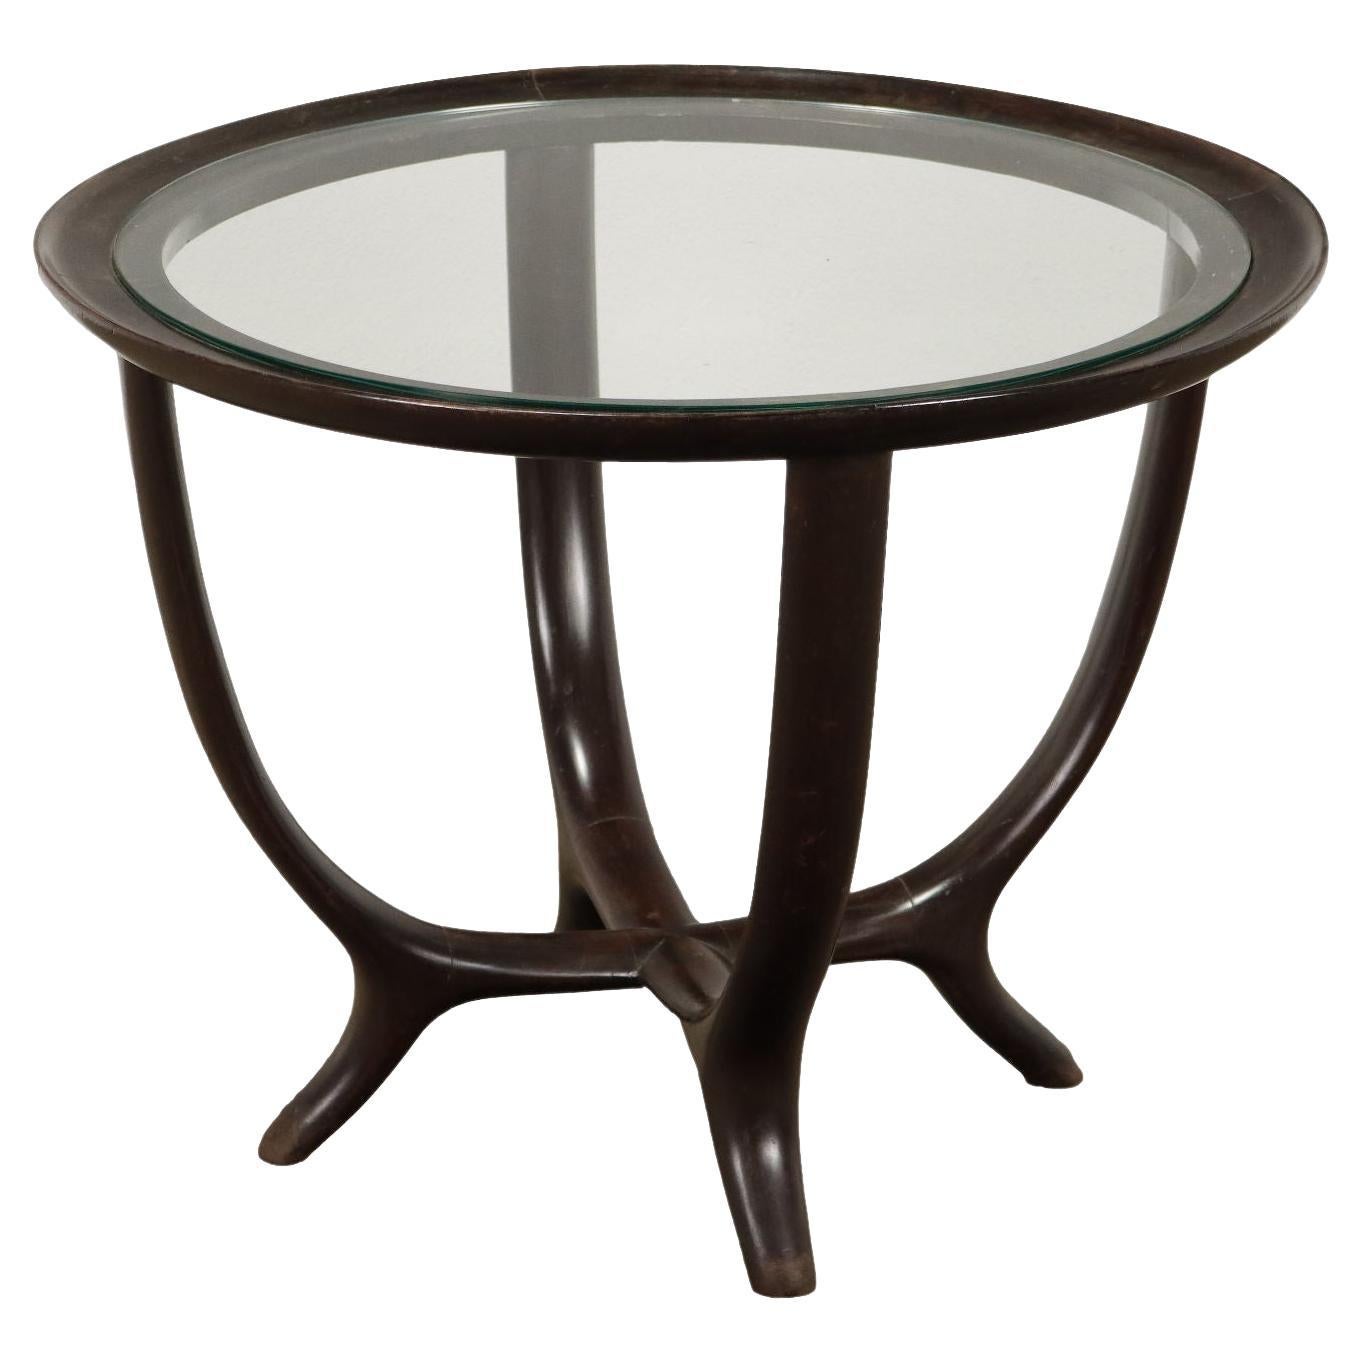 1950s coffee table in ebony-stained wood and glass